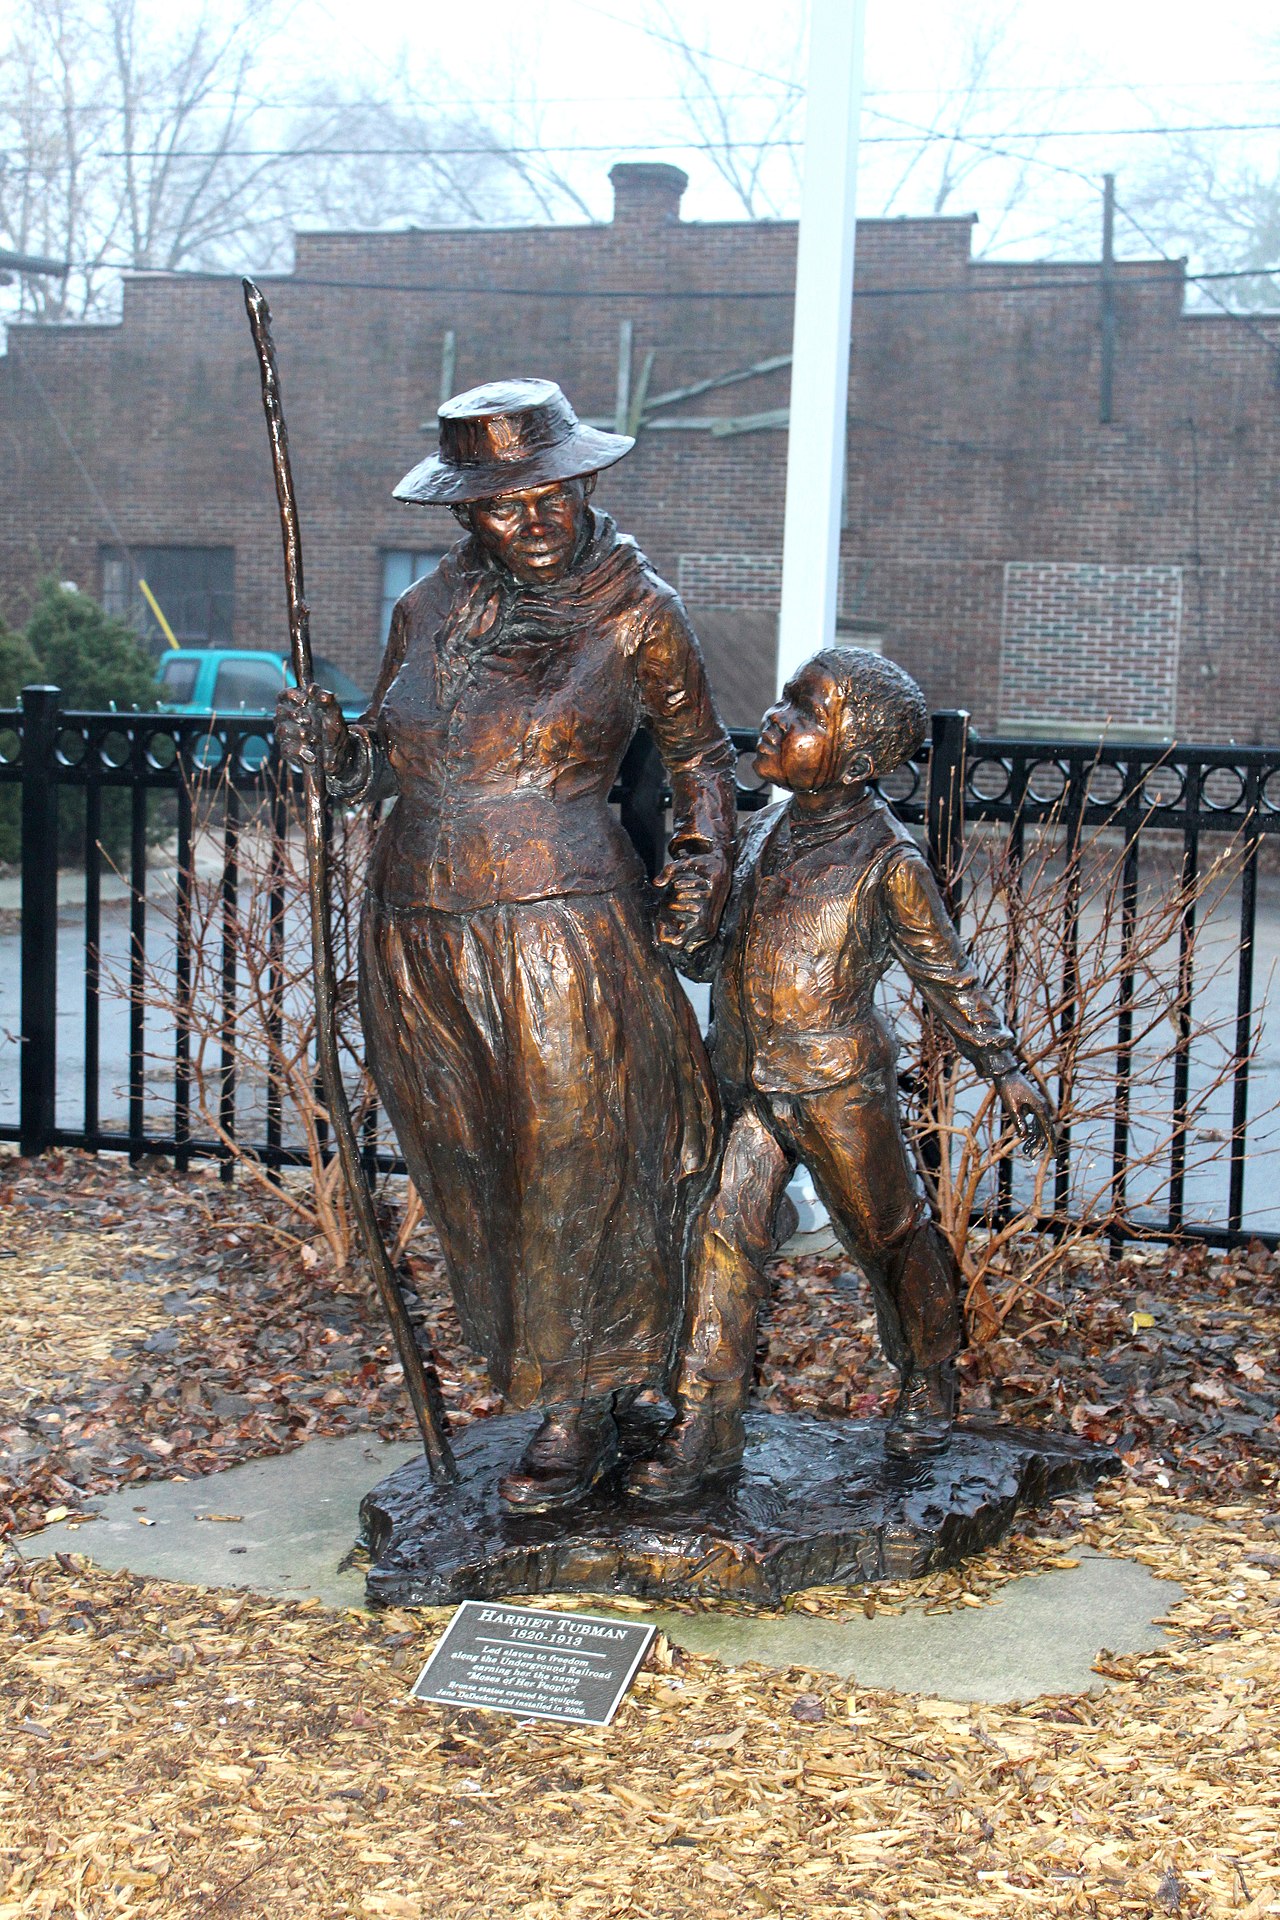 A sculpture by Jane DeDecker, photograph by Dwight Burdette, CC BY 3.0, https://commons.wikimedia.org/w/index.php?curid=17752948